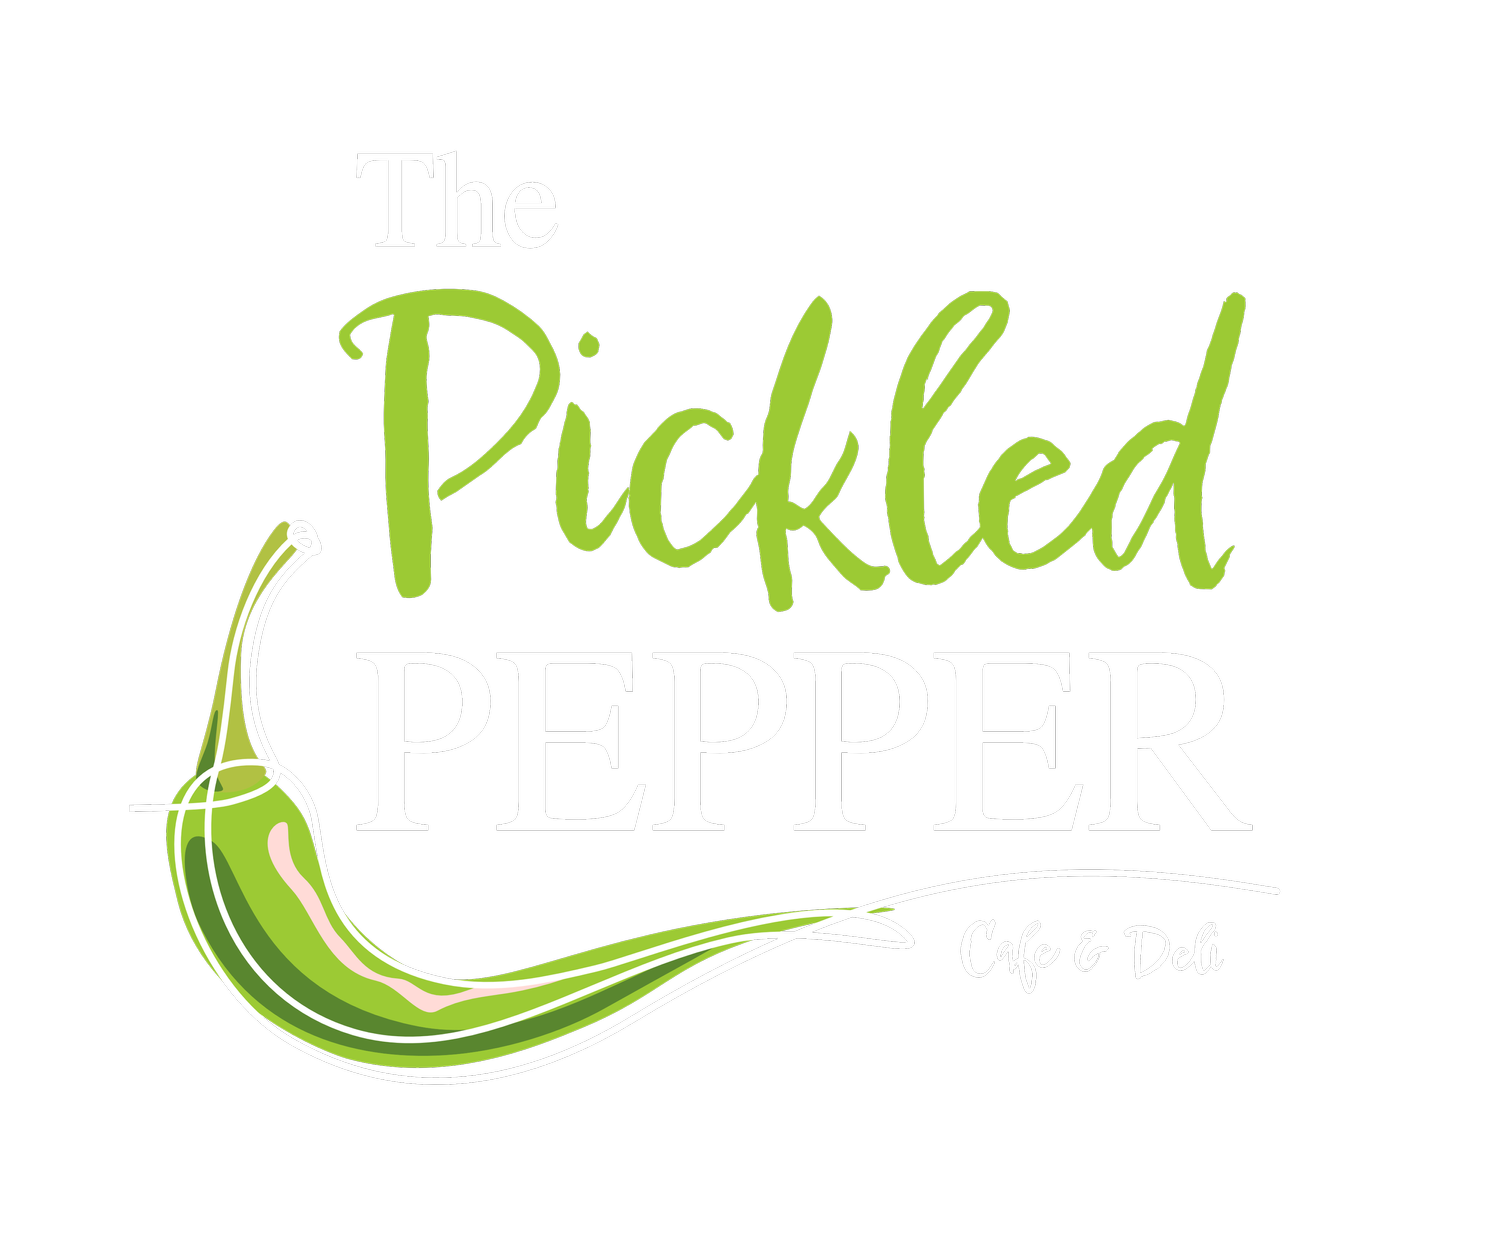 The Pickled Pepper